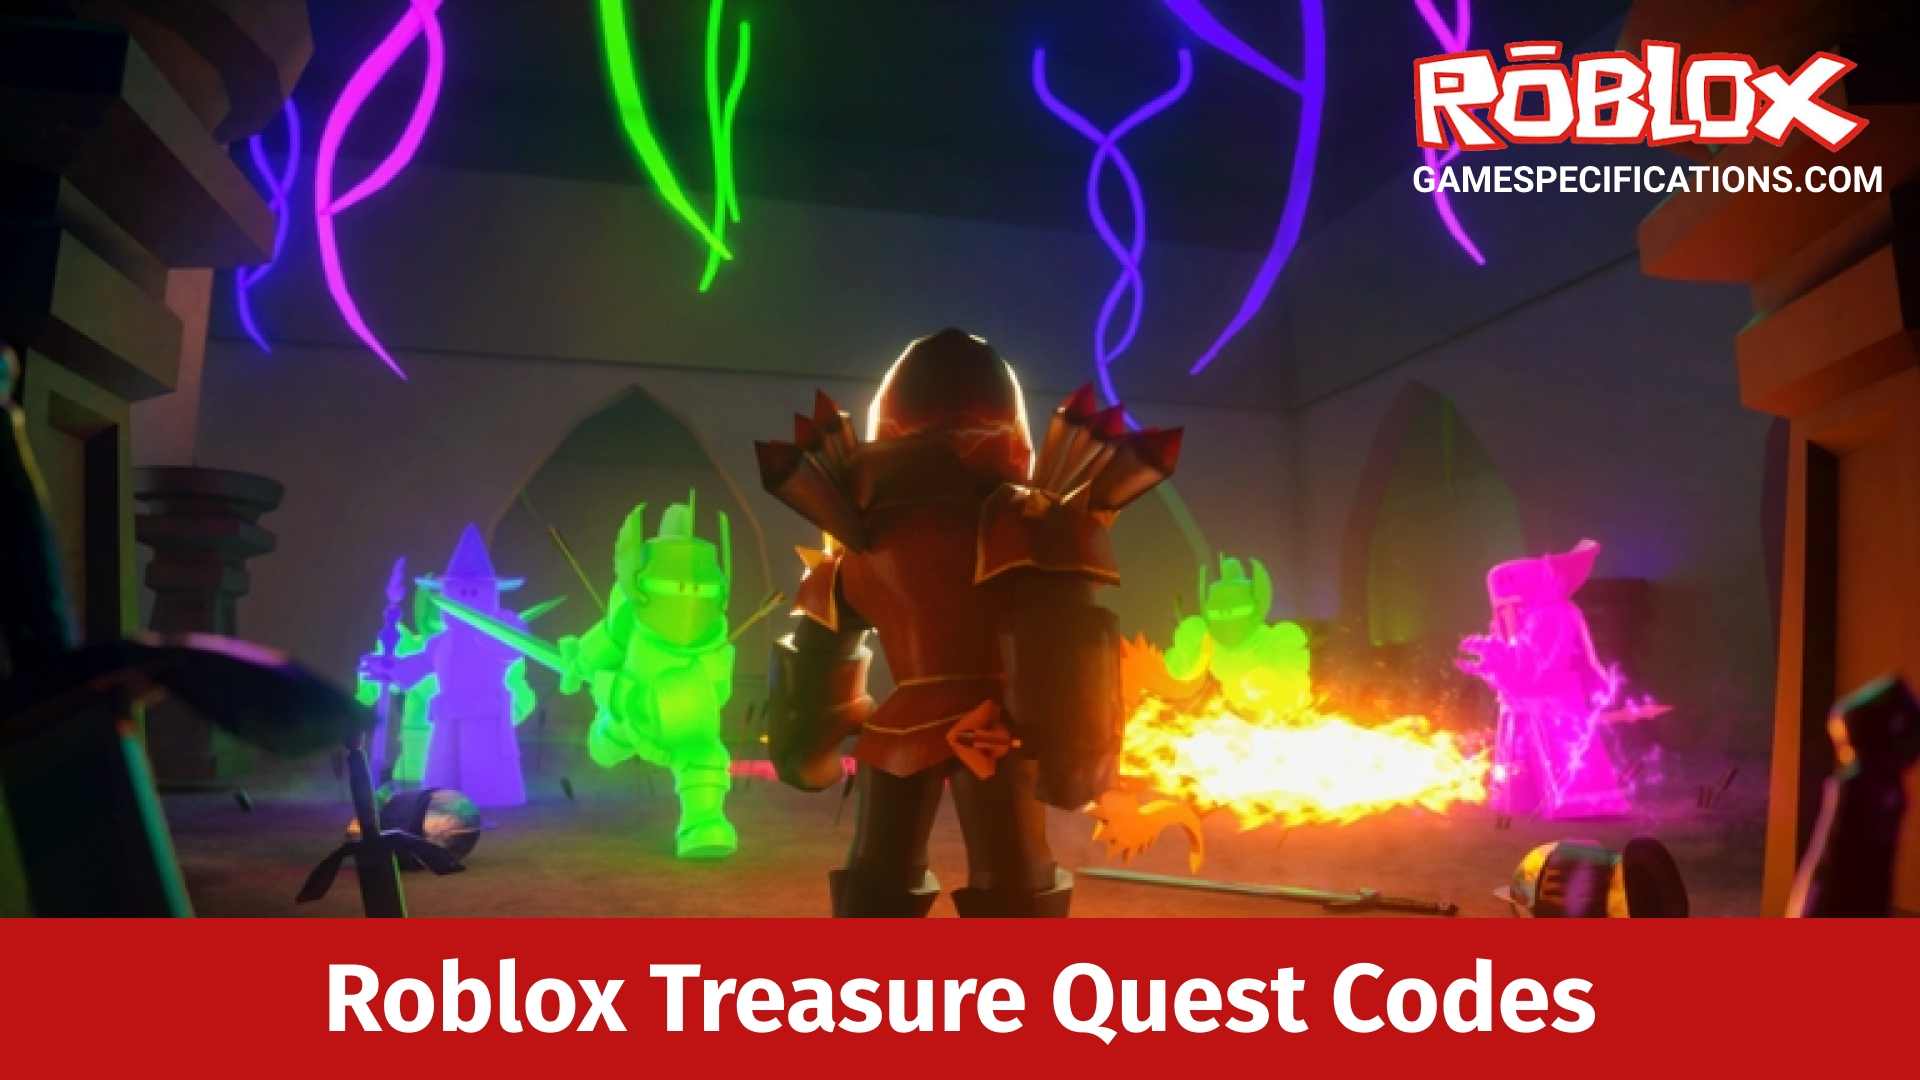 Roblox Treasure Quest Codes July 2021 Game Specifications - roblox dungeon crawler games